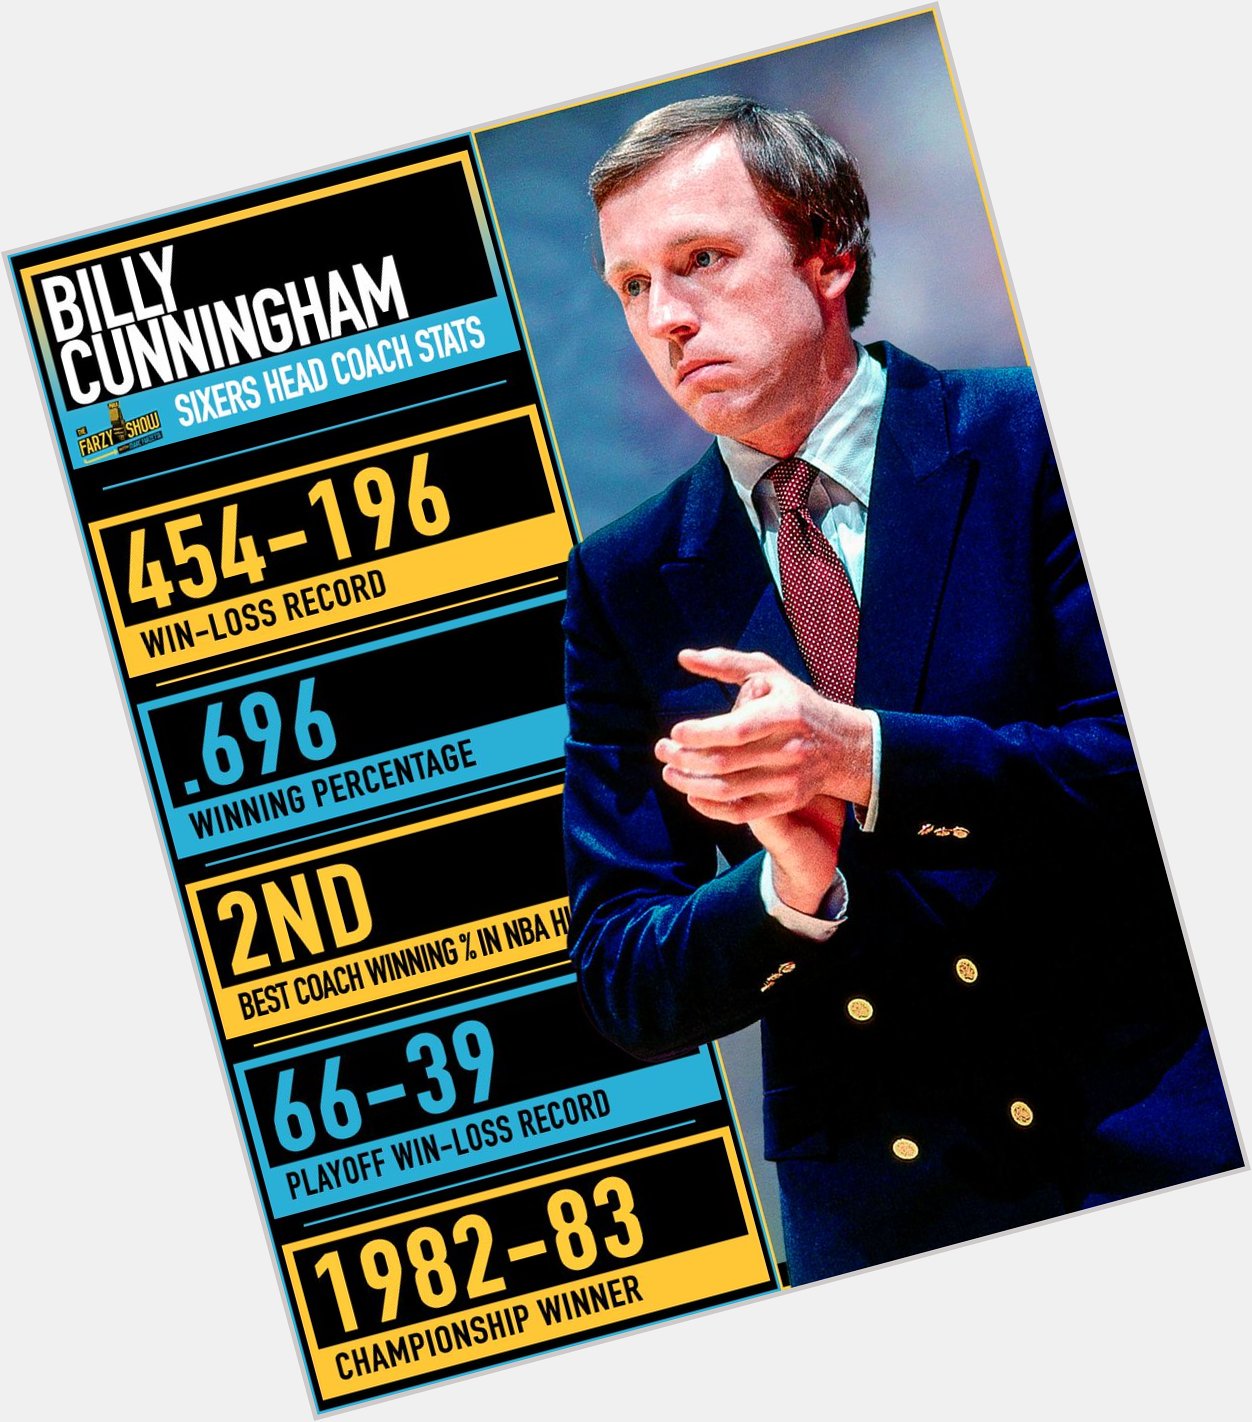 Best coach in history? He celebrates a birthday today! Happy birthday to Billy Cunningham!  